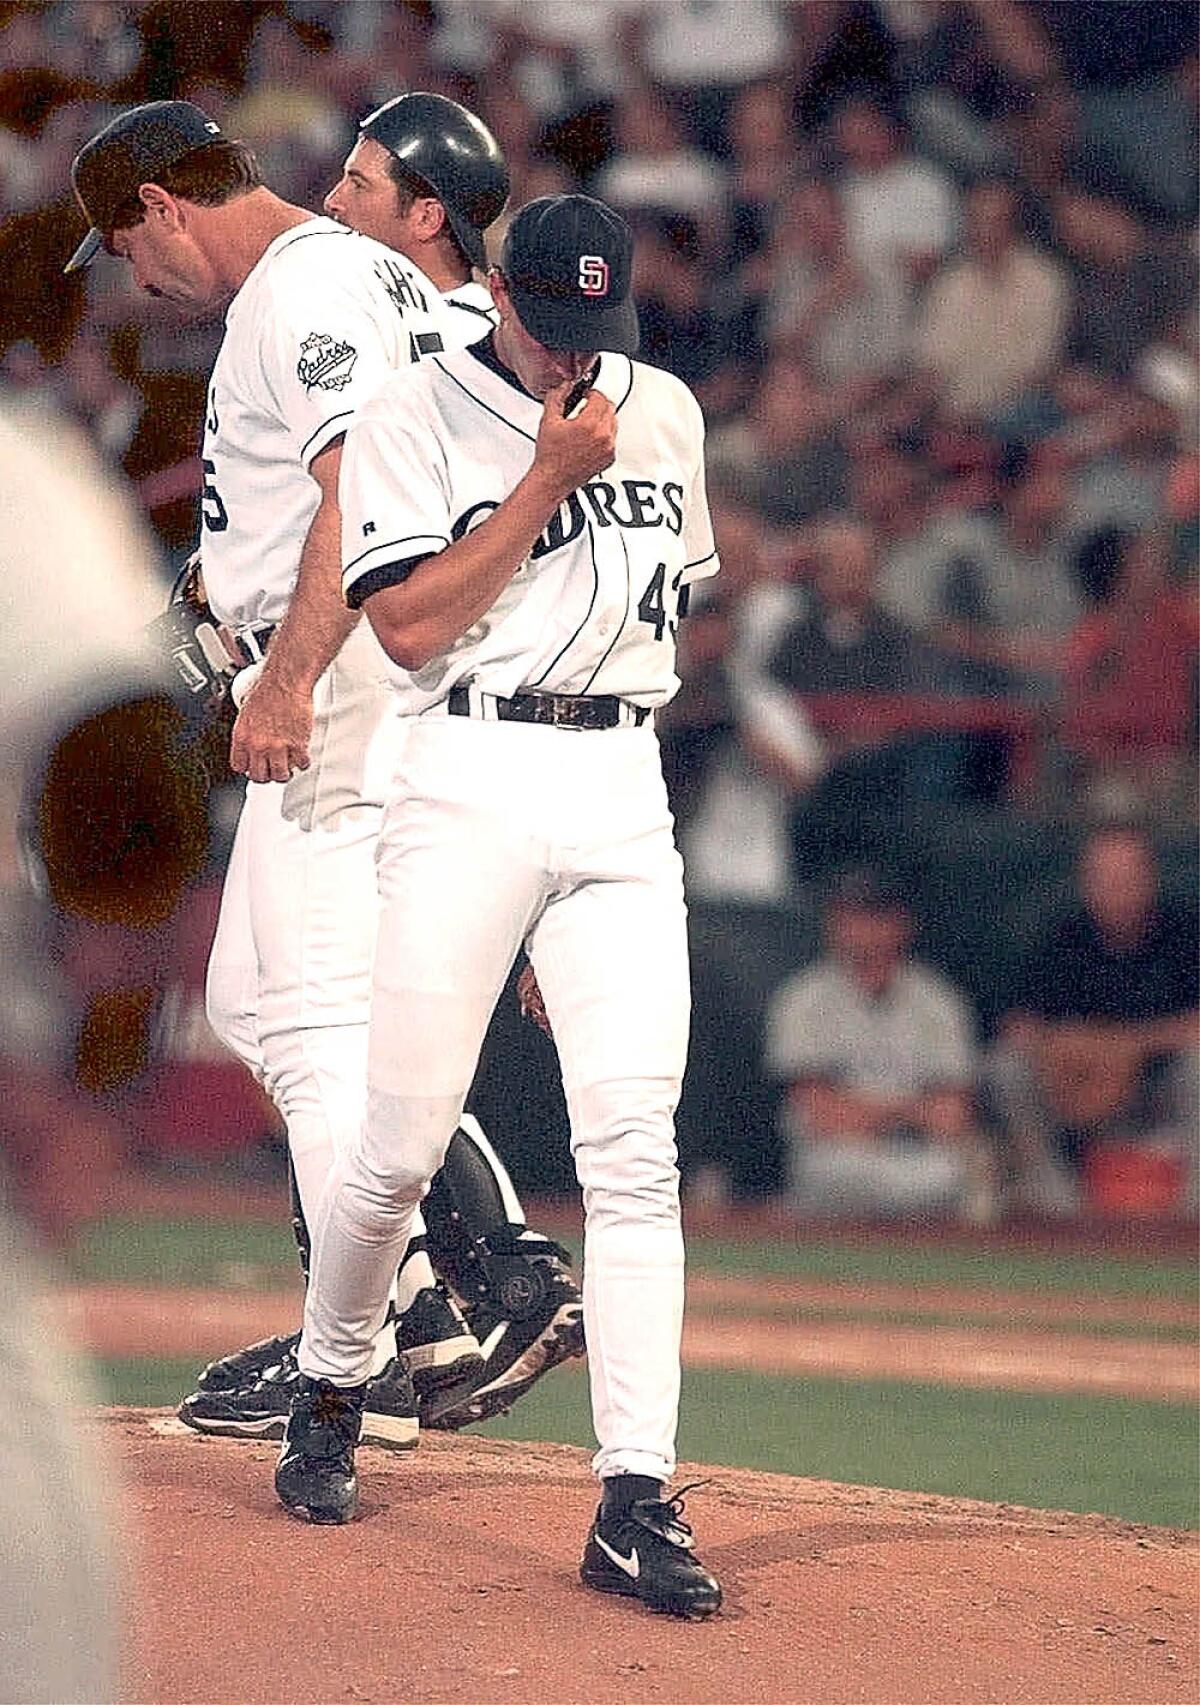 Padres history (April 4): Rockies steal the show in Mexico - The